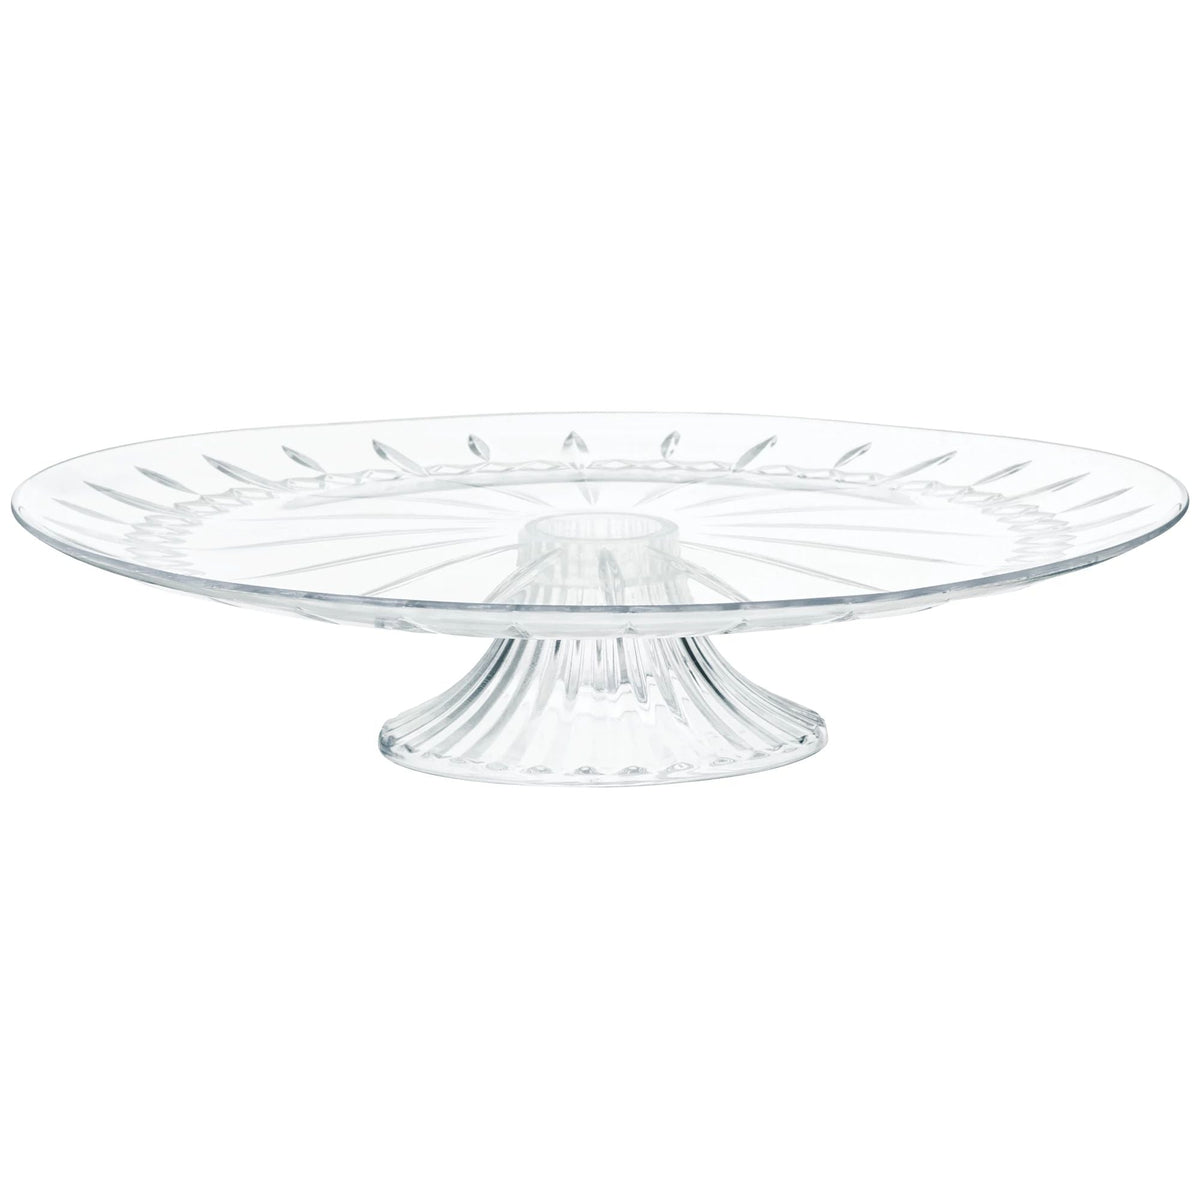 AMSCAN CA Cake Supplies Clear Plastic Cake Stand, 13 Inches, 1 Count 192937426067